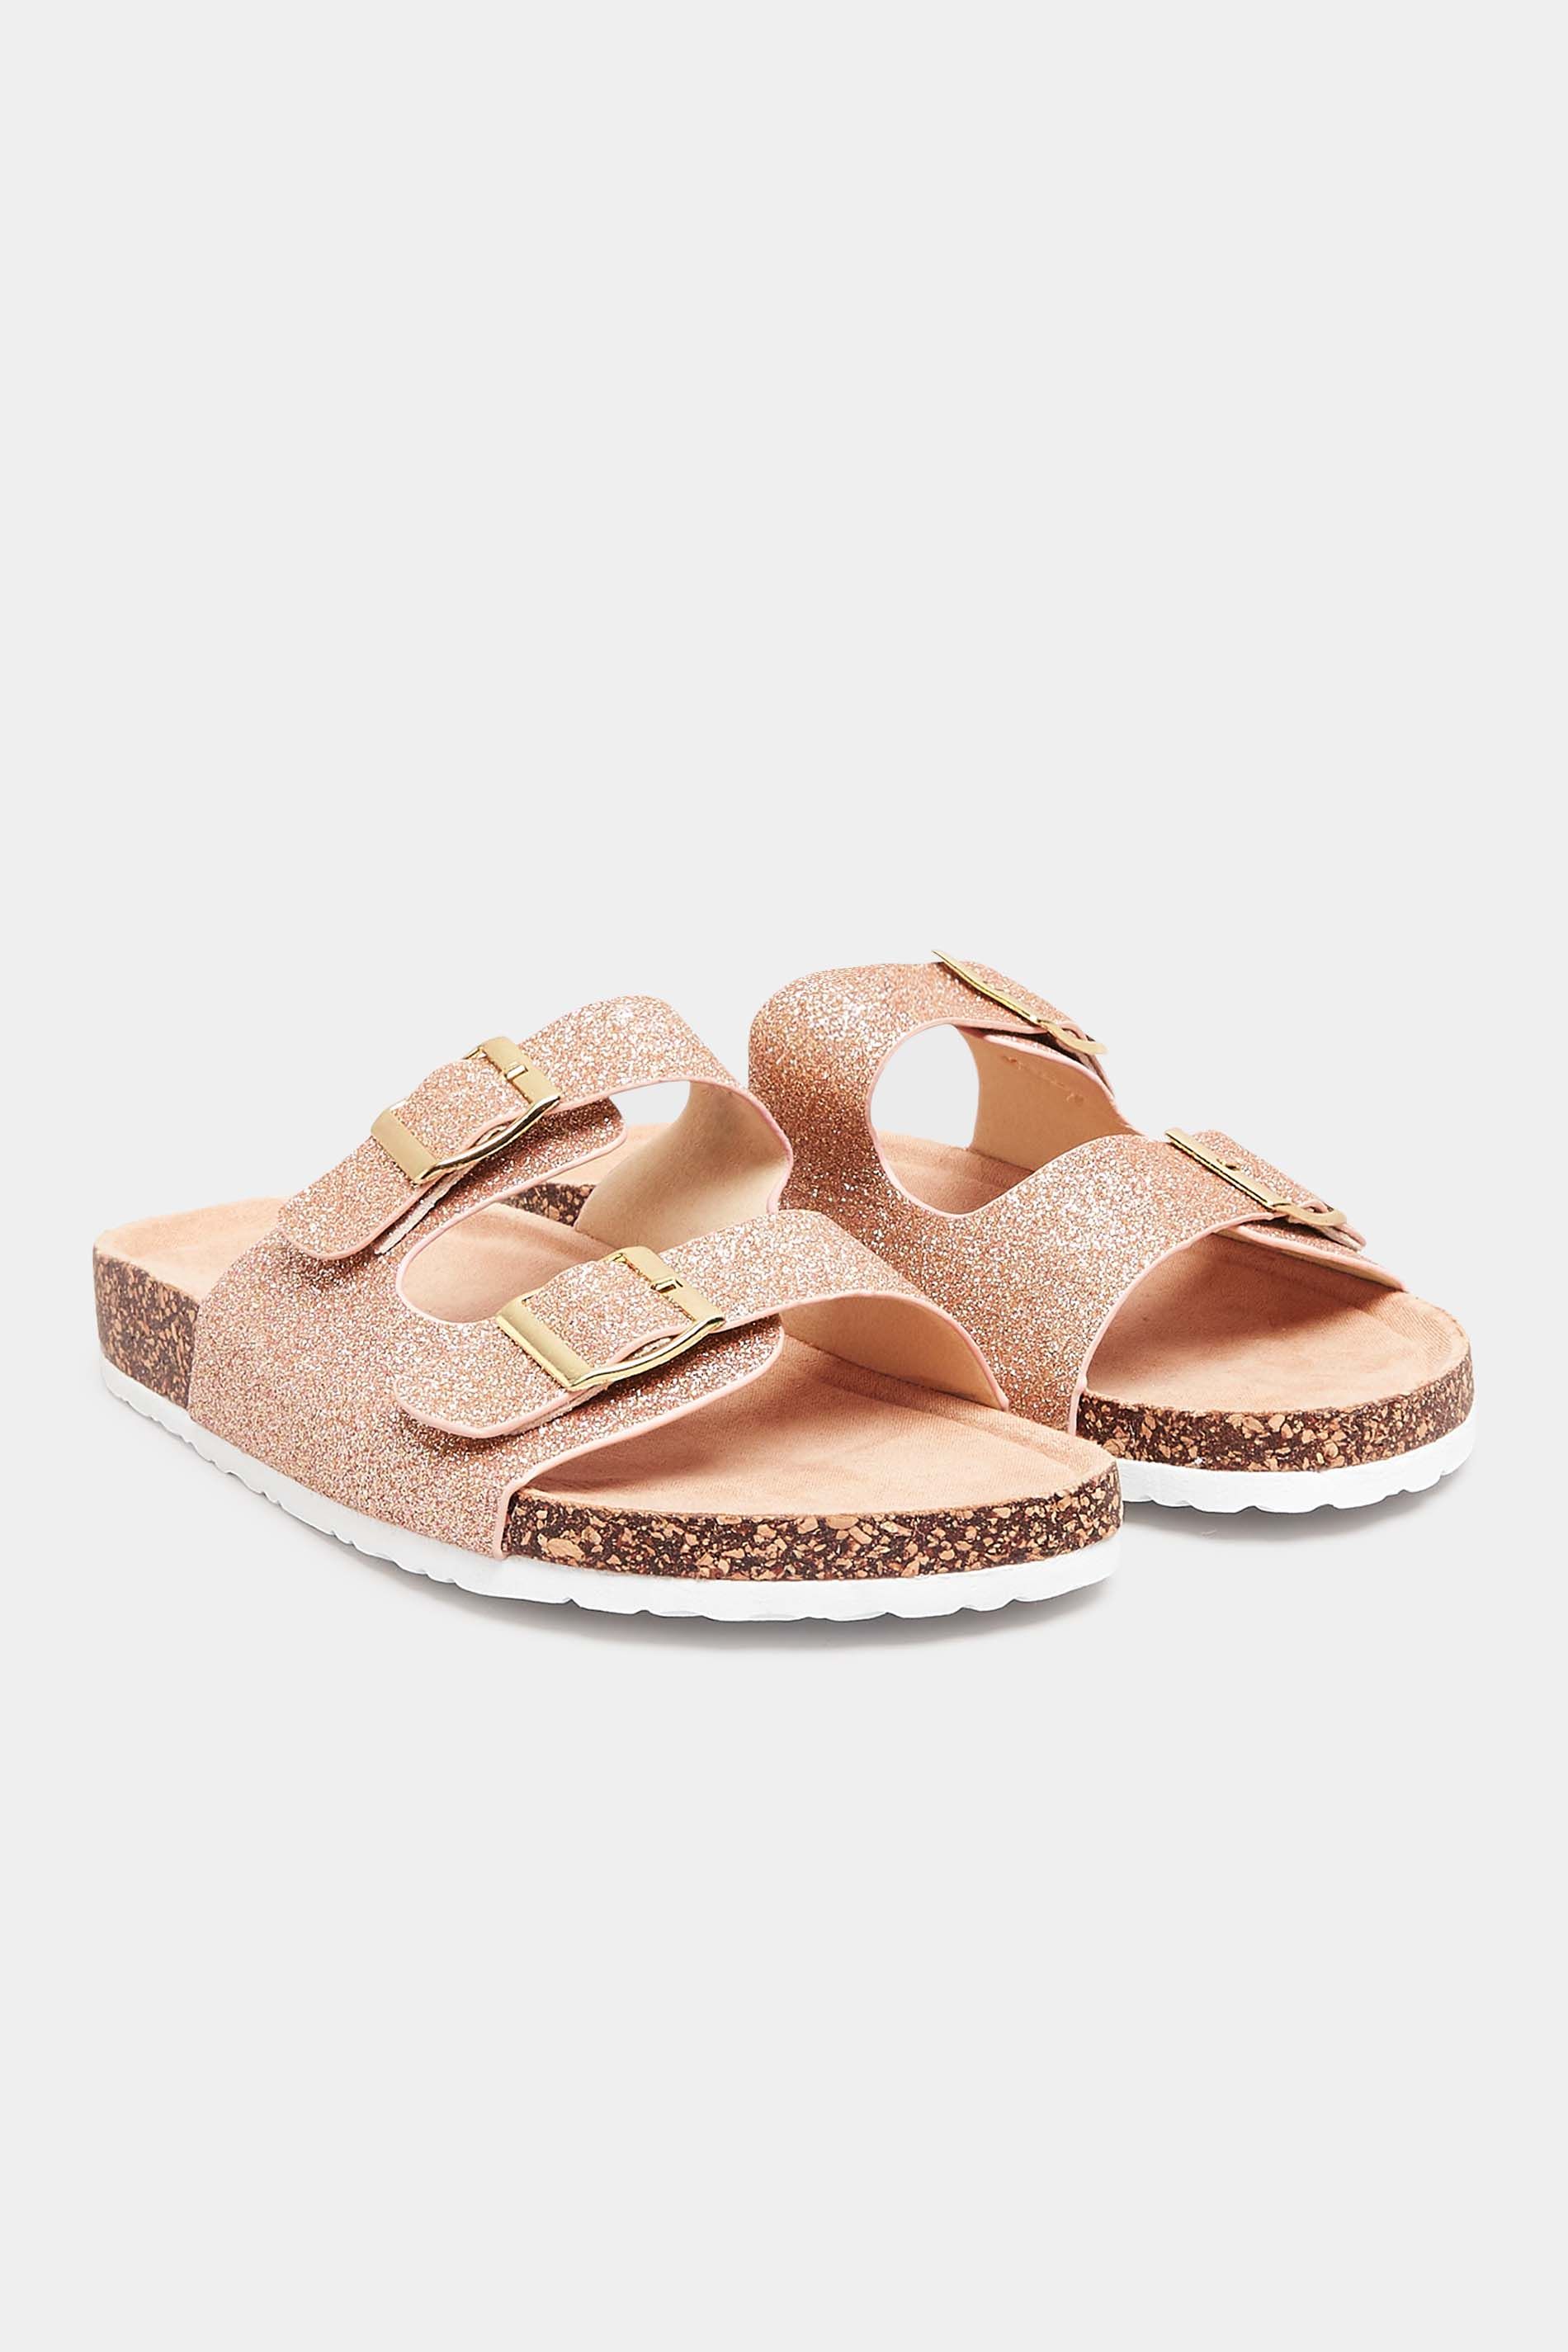 LTS Pink Glitter Buckle Footbed Sandals In Standard D Fit | Long Tall Sally